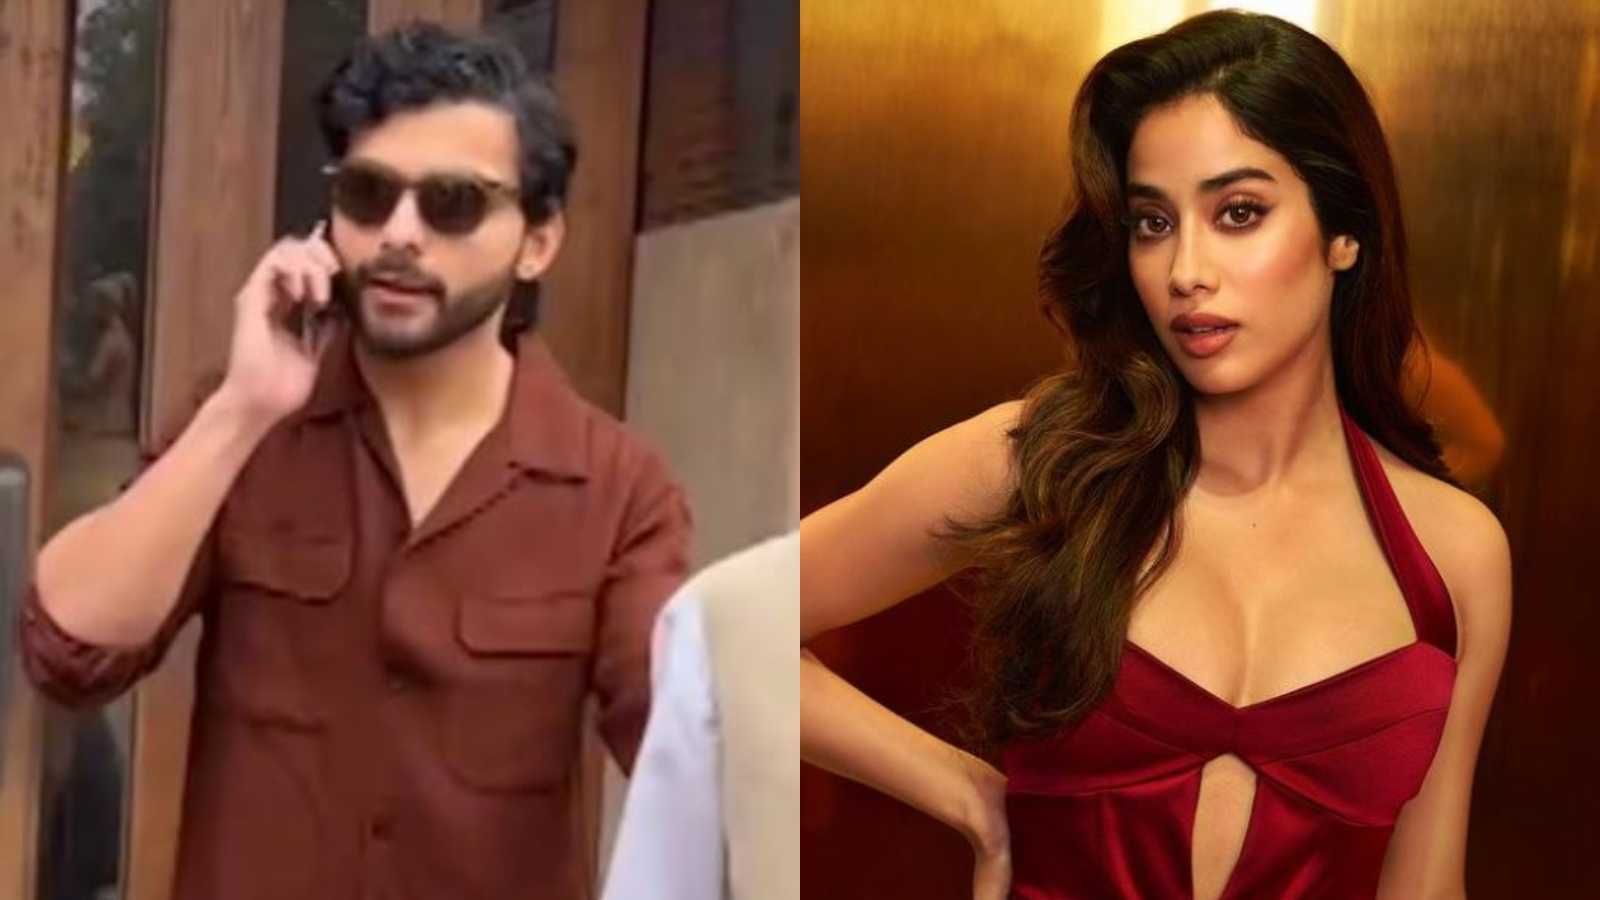 Koffee With Karan 8: Janhvi Kapoor talks about how BF Shikhar Pahariya is different; reveals the song he used to sing for her